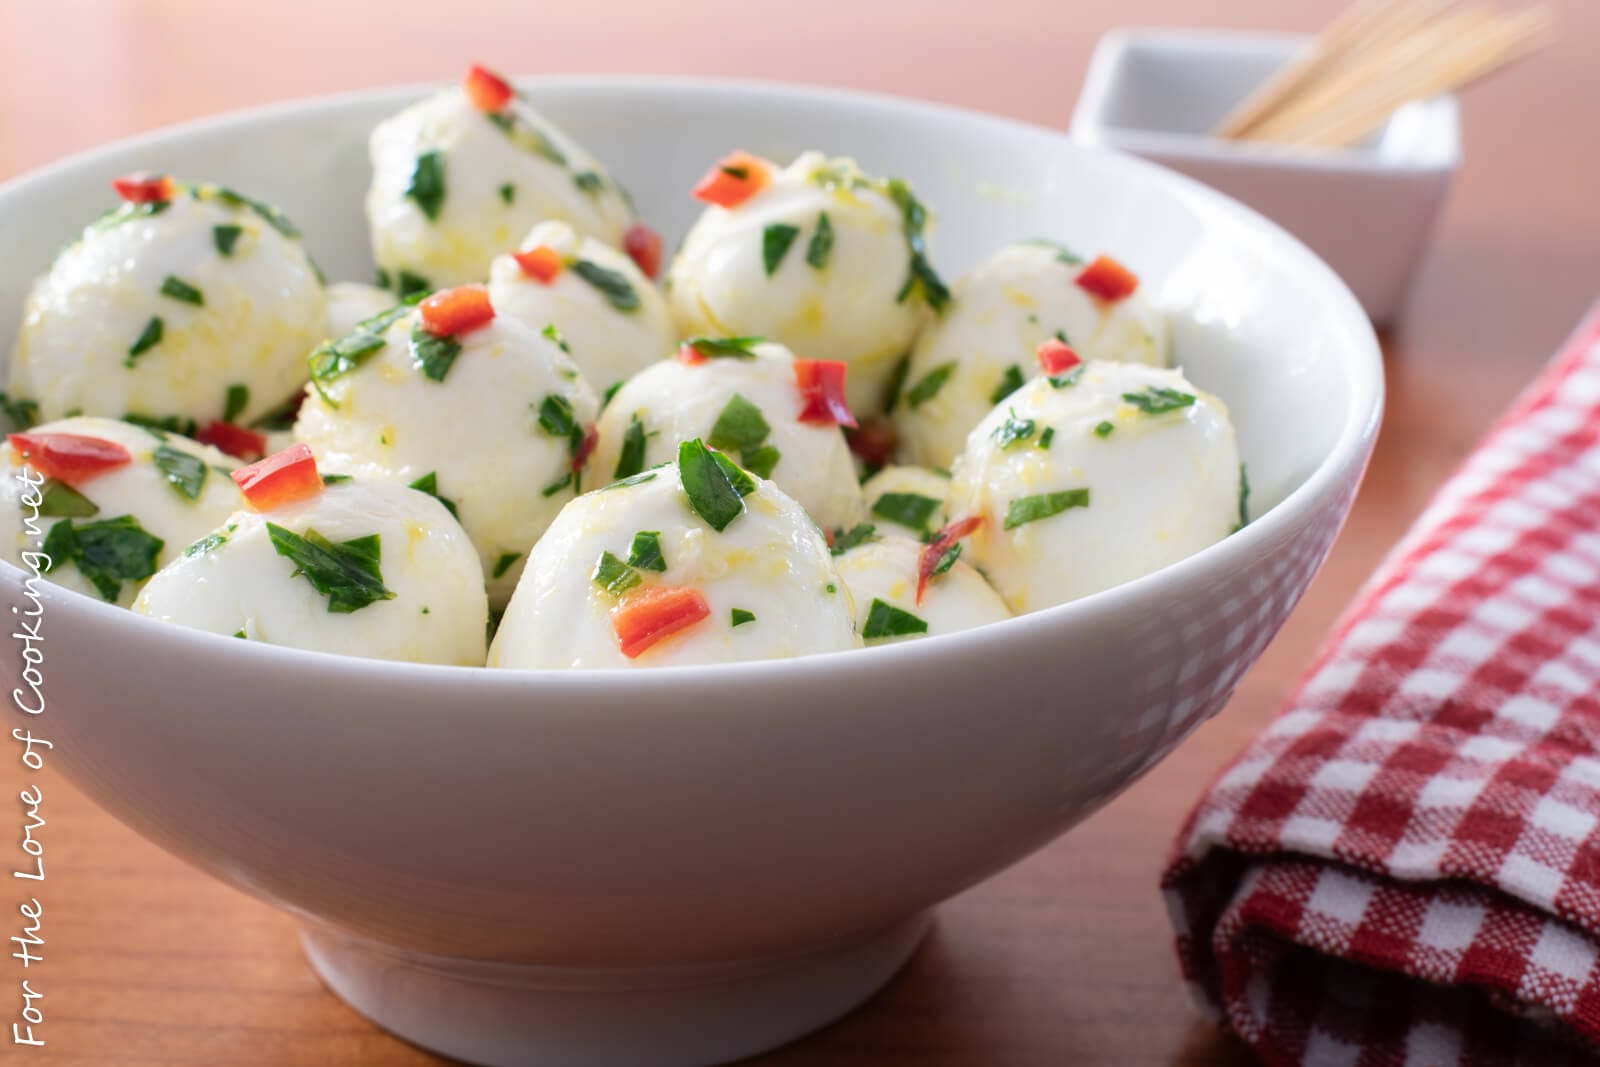 Marinated Mozzarella Balls | For the Love of Cooking